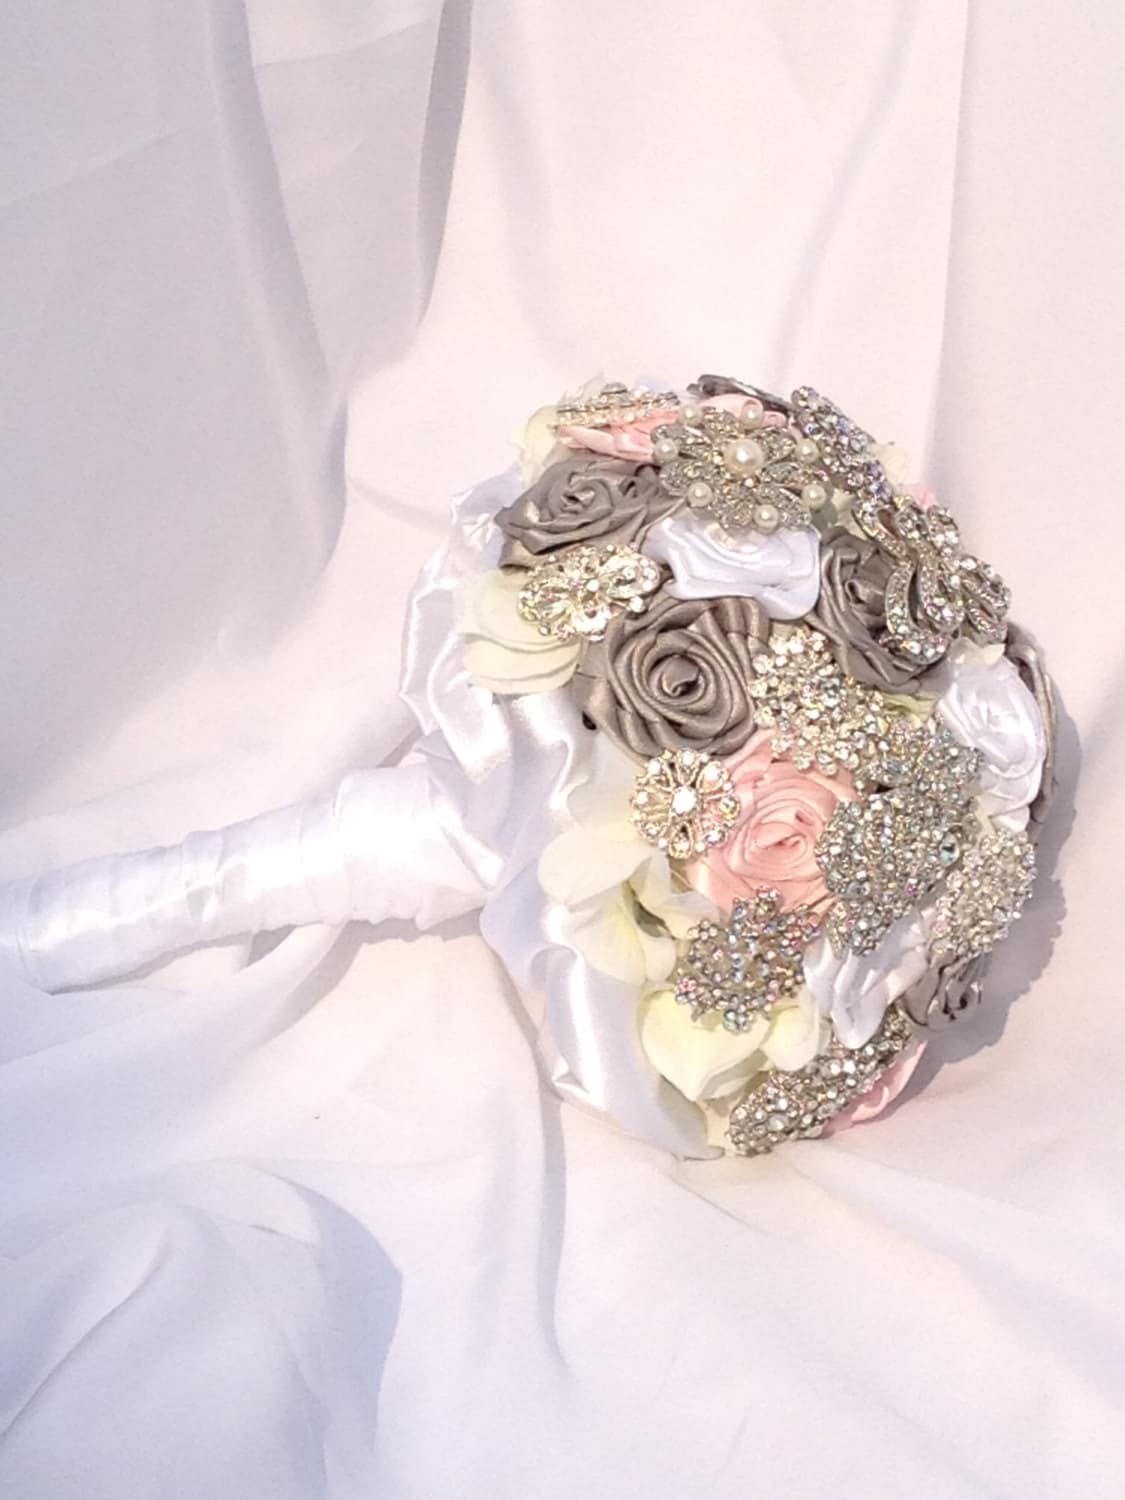 6 inch Wedding Brooch Bouquet with Pink, Grey and White Satin Roses